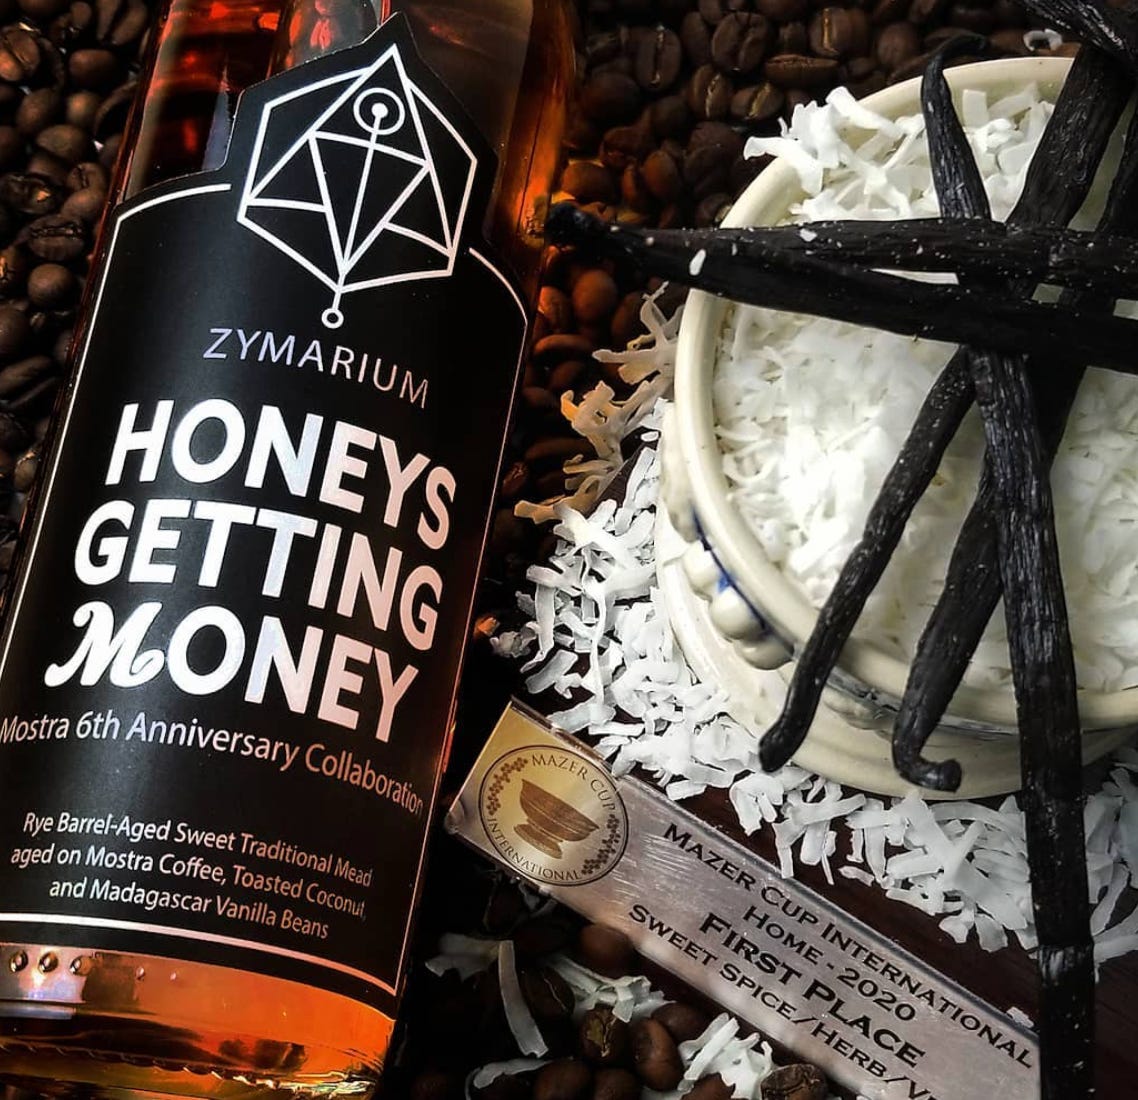 A bottle of honey mead resting on a bed of coffee beans, and to the right is a pile of shaved coconut and some vanilla beans.